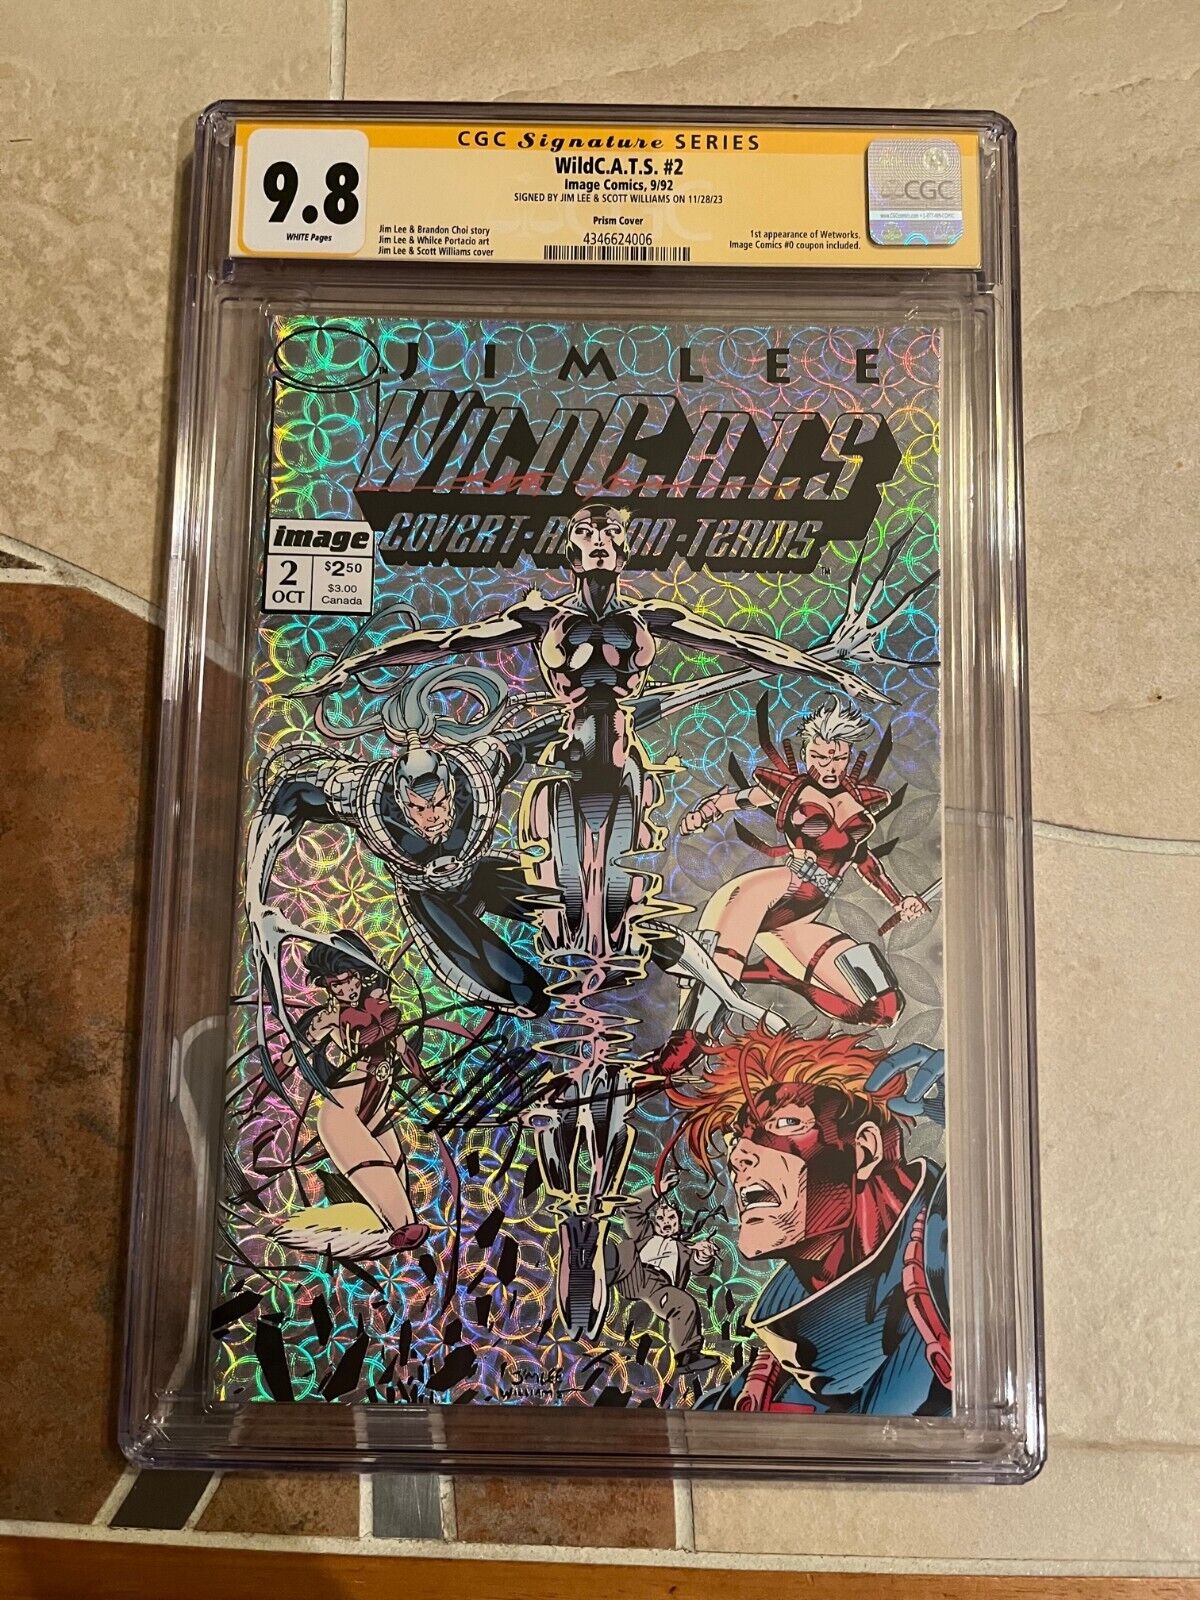 WildC.A.T.S. #2 CGC 9.8, SS X2 signed by Jim Lee +Scott Williams, prism variant